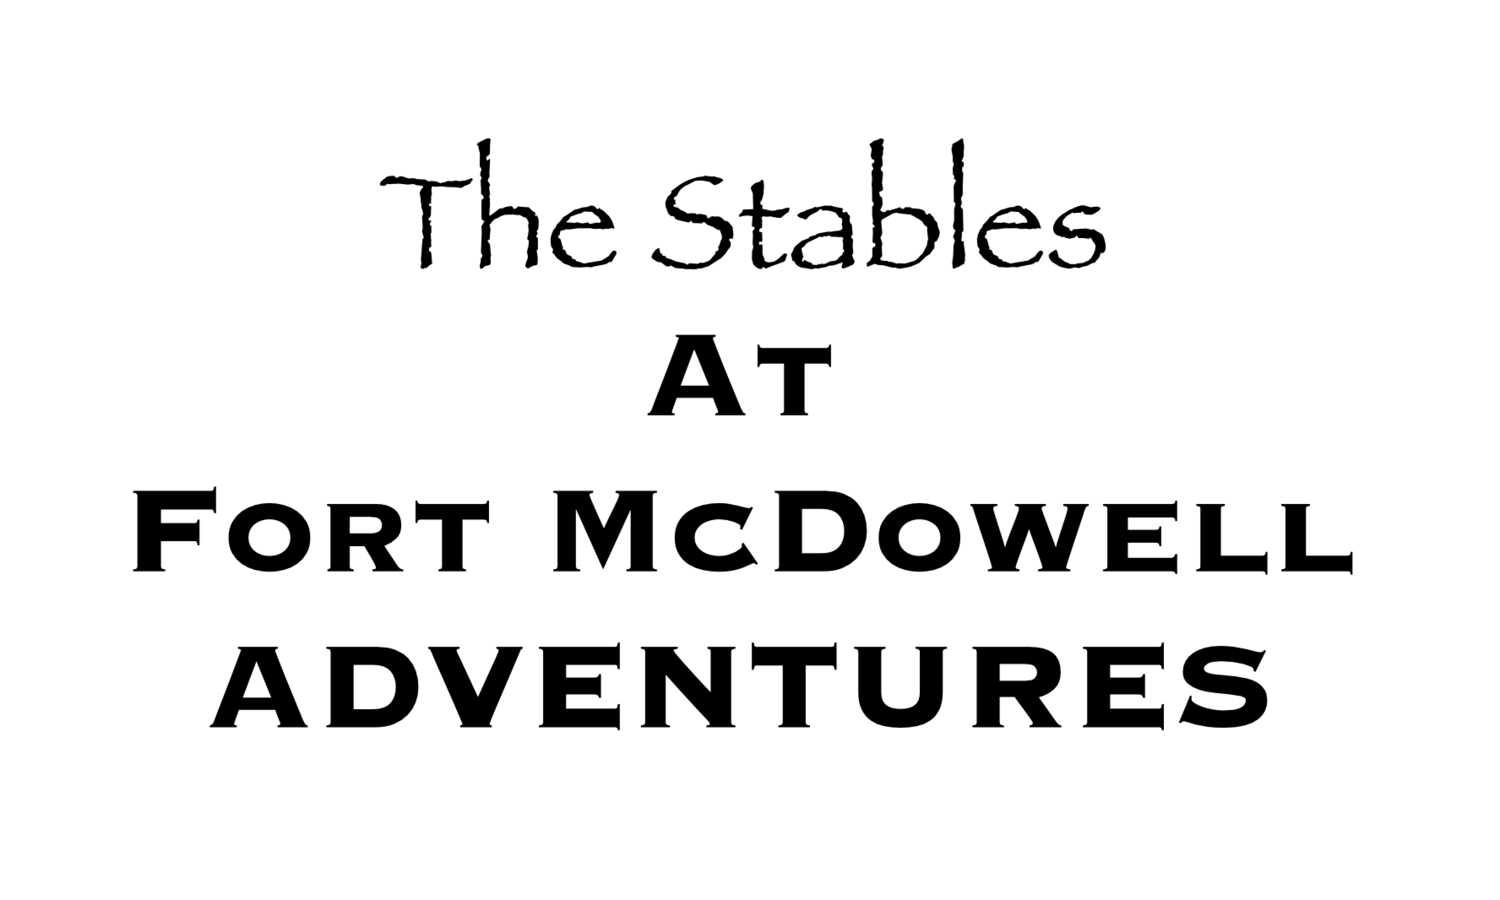 The Stables at Fort McDowell Adventures